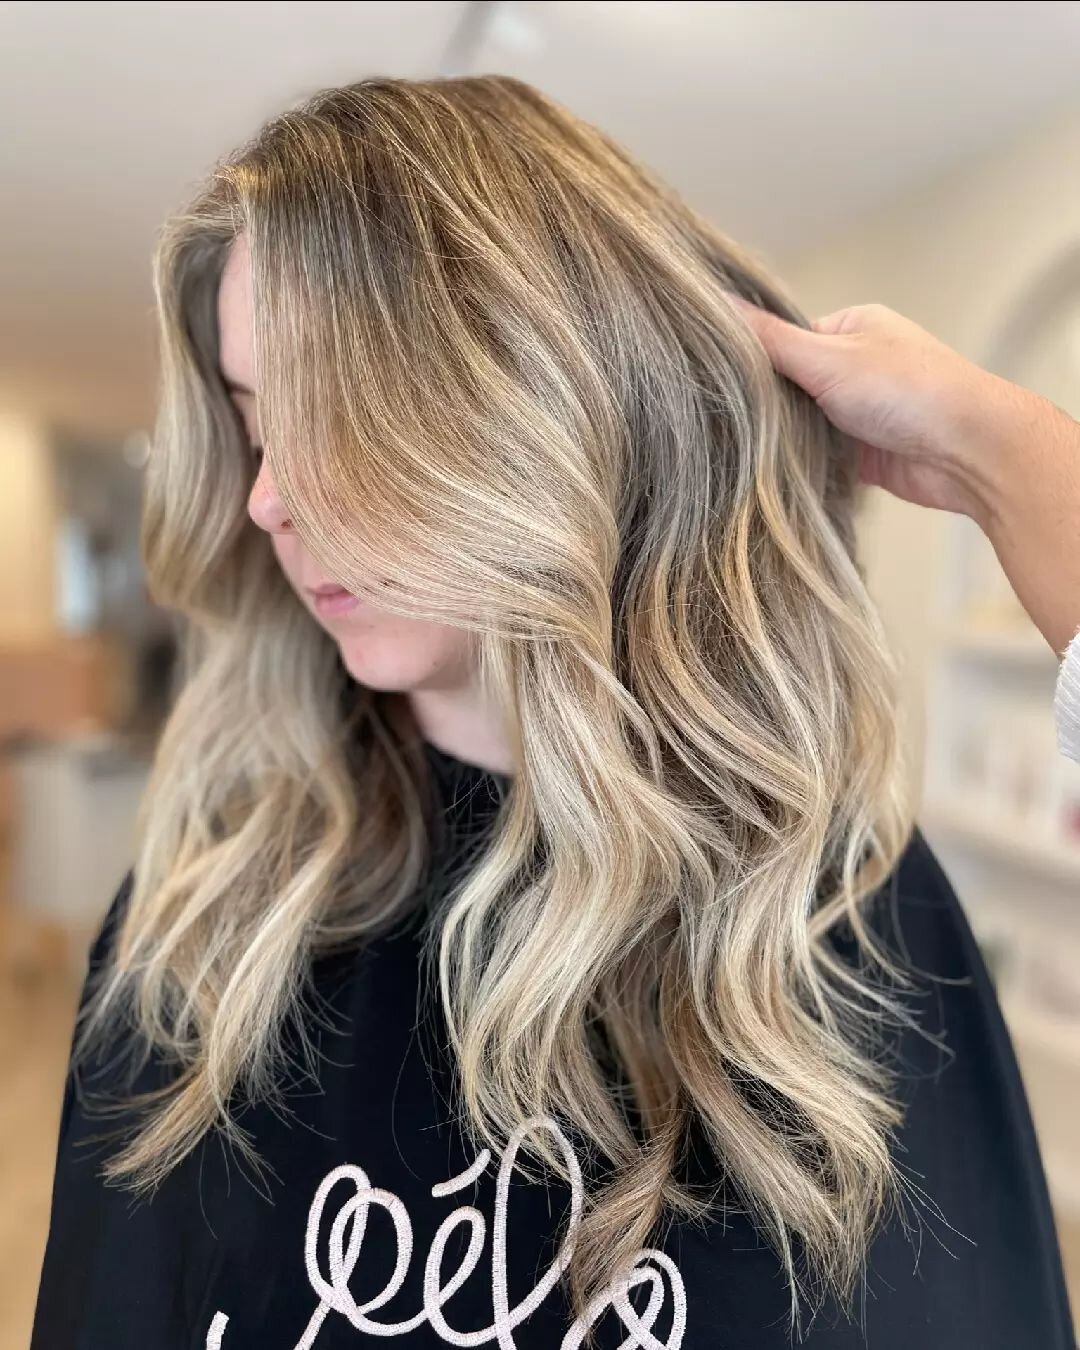 What can't @lucy_pelobylago do?! Seriously though, this blend&nbsp;😍

Book your appointment with Lucy today via the link in bio, call or email us info@pelobylago.com